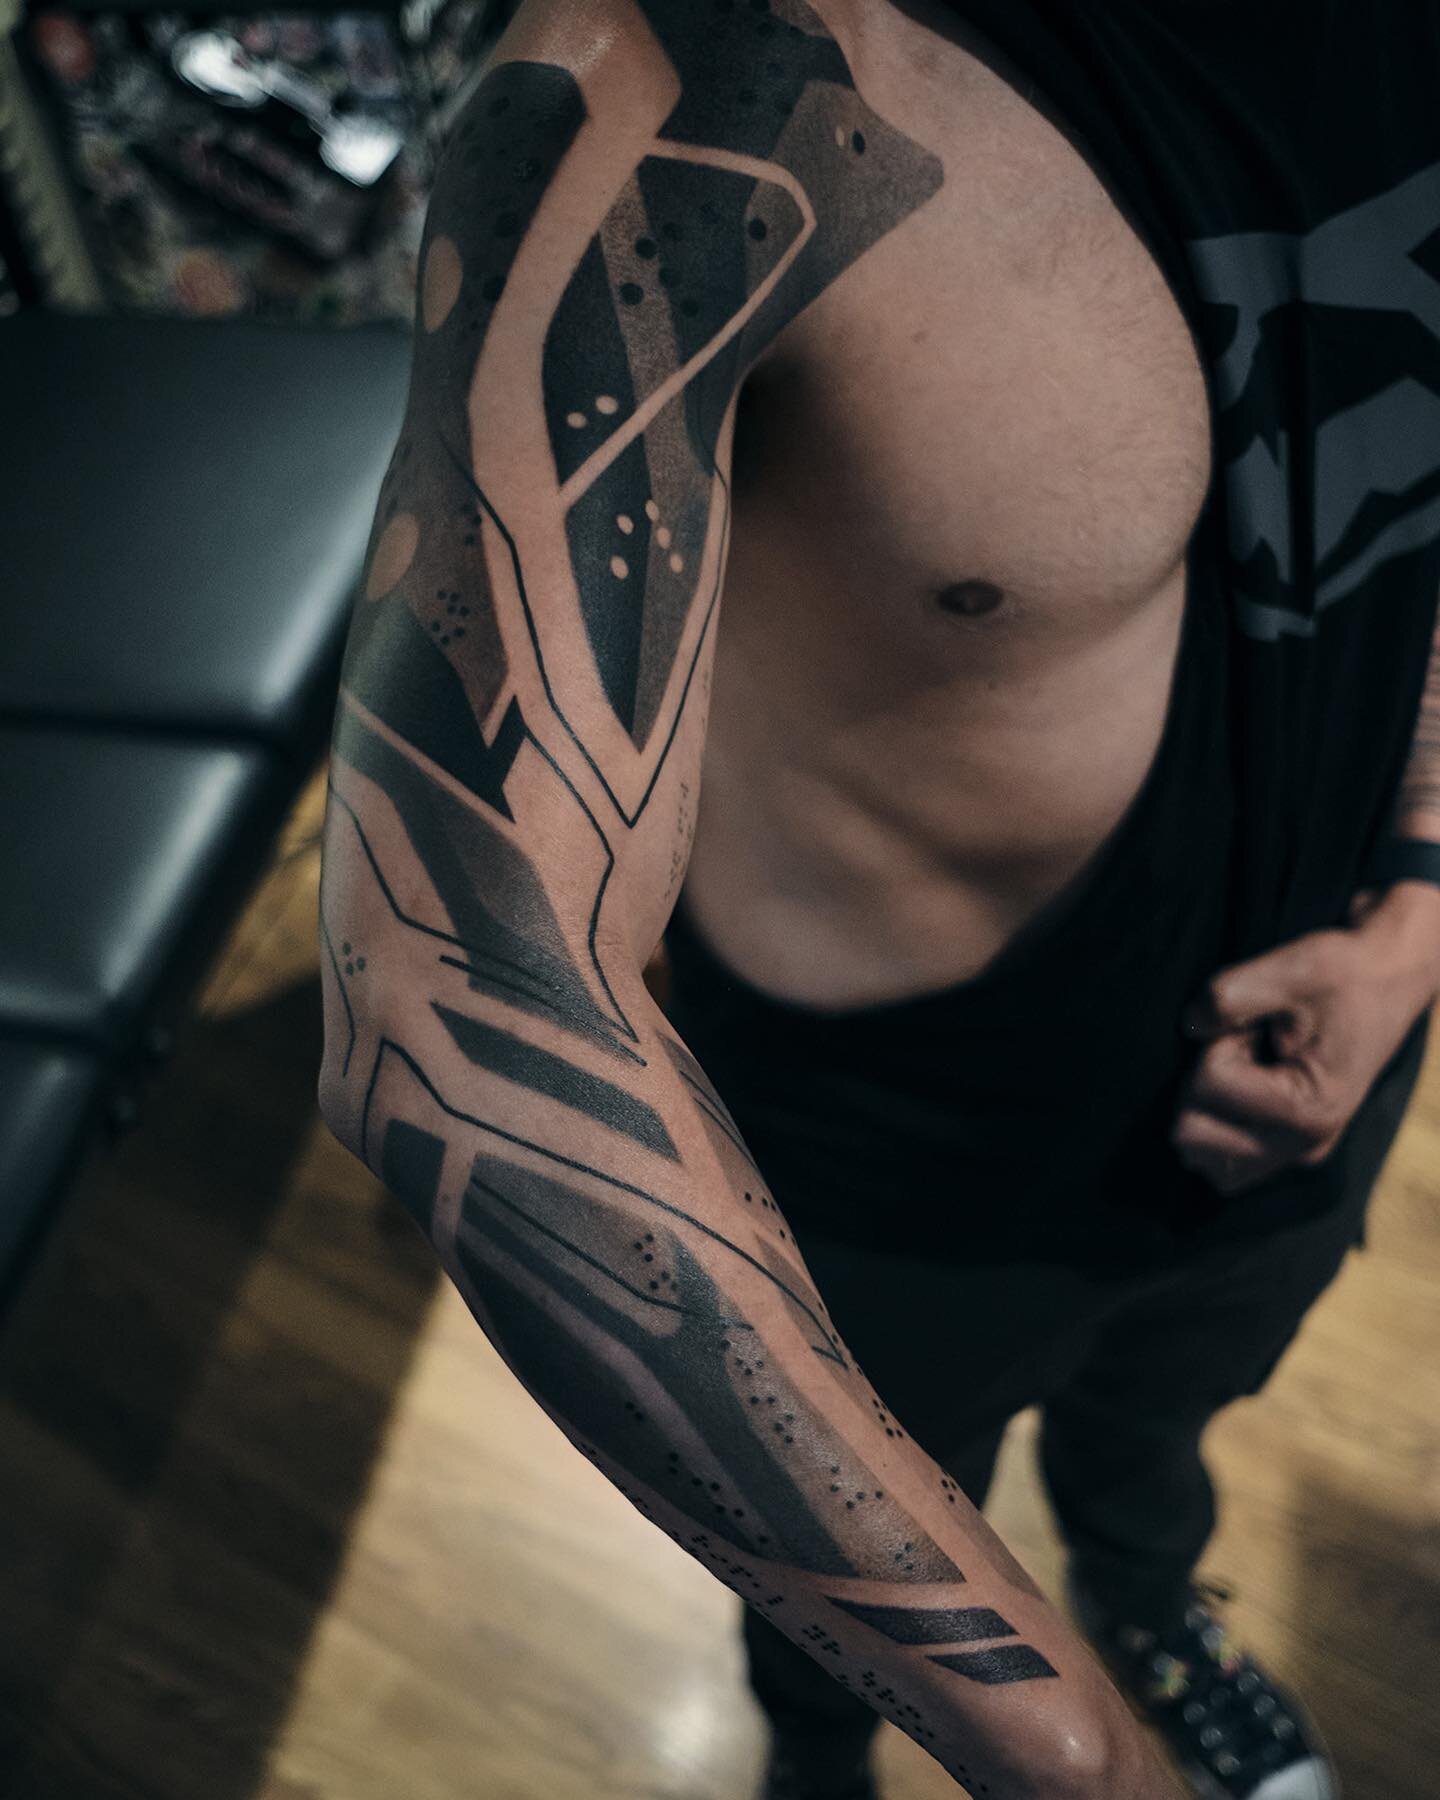 cyberpunk tattoo by jackthebloody at pepper in flame tattoo studio, italy :  r/tattoos